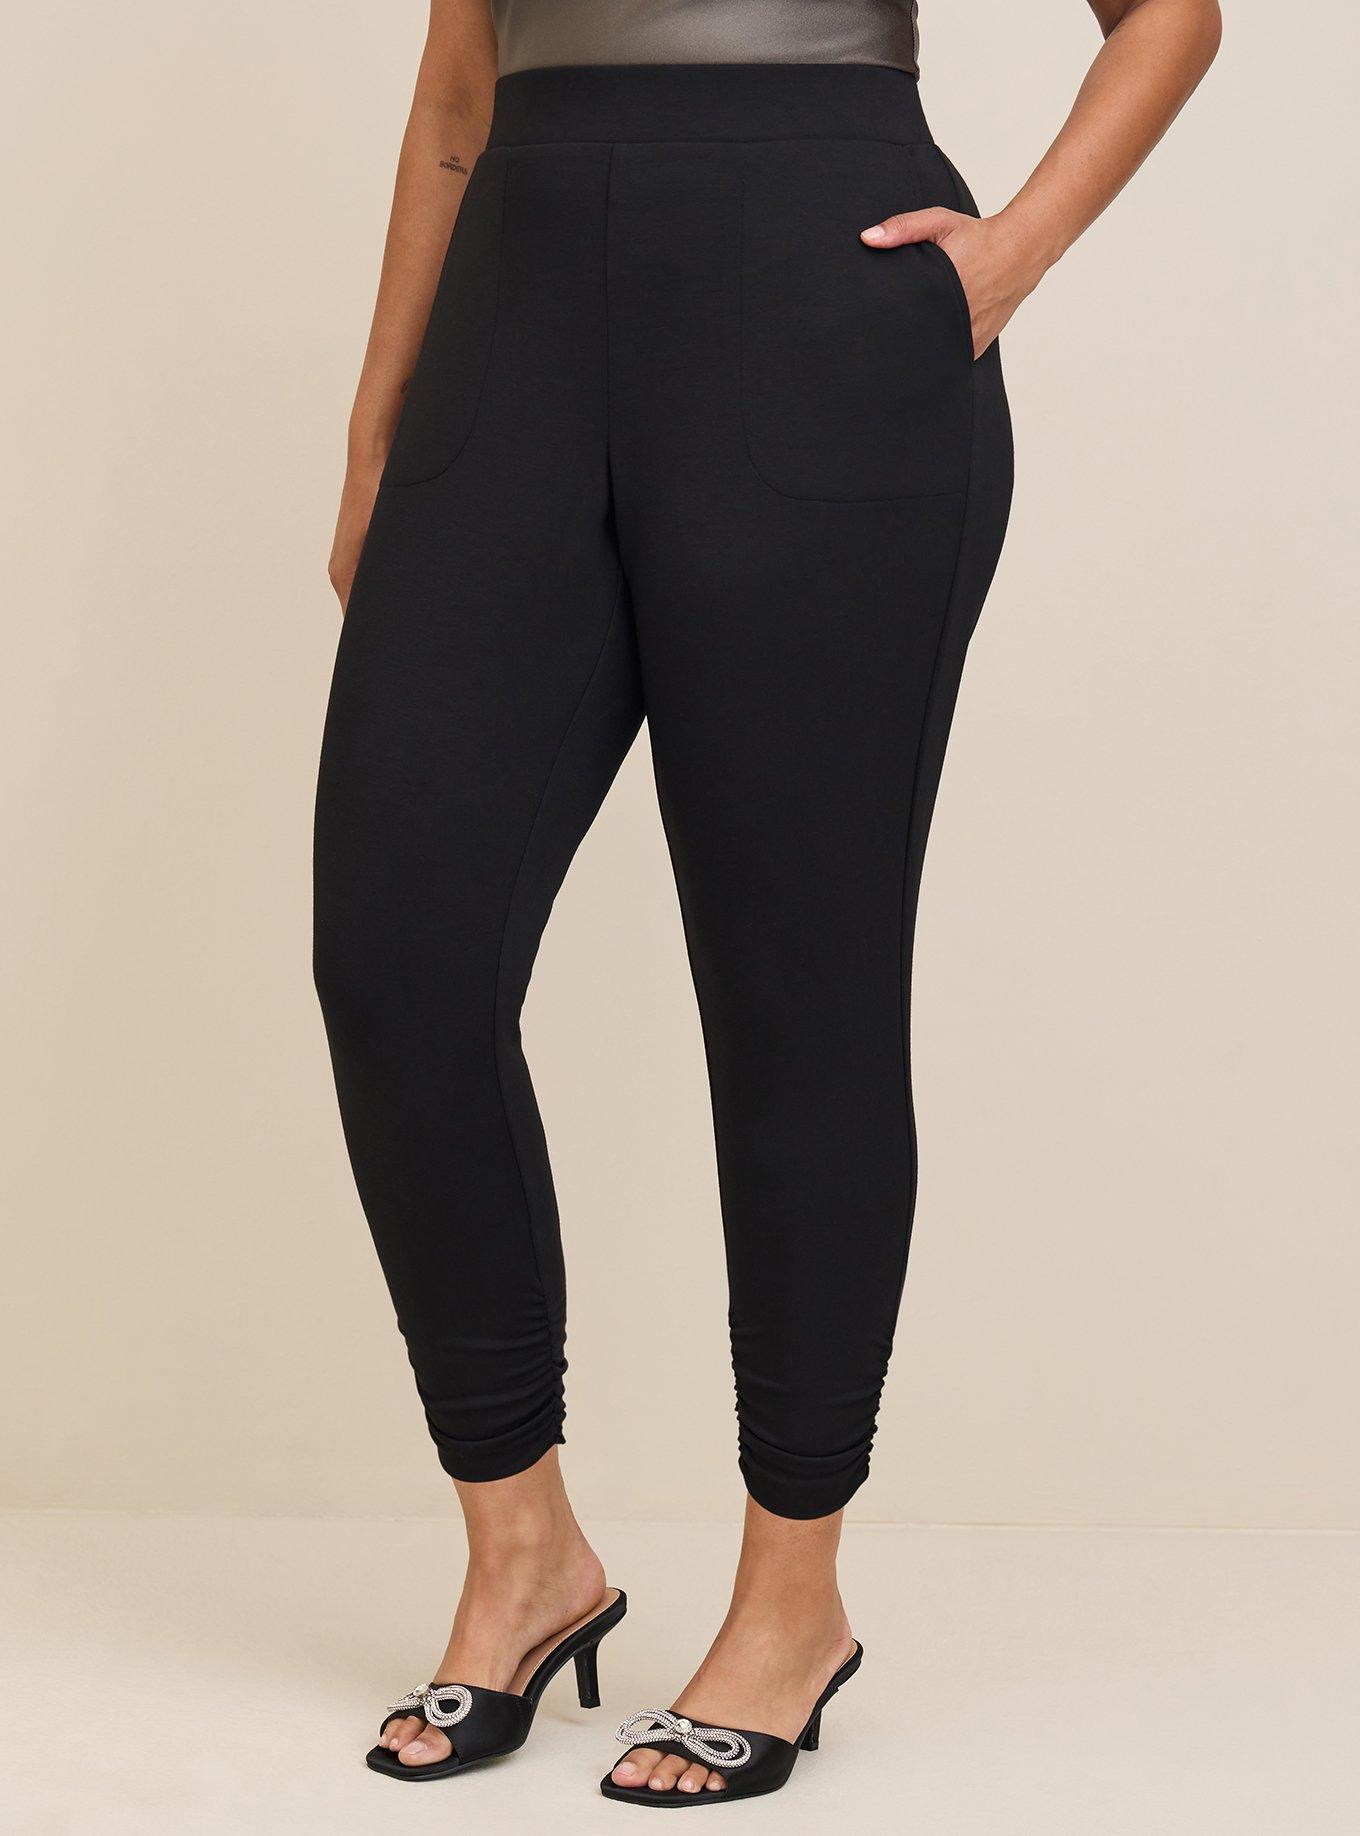 SPANX, Pants & Jumpsuits, Red Hot Spanx Shaping Leggings Calflength  Pullonhighrise Small Black